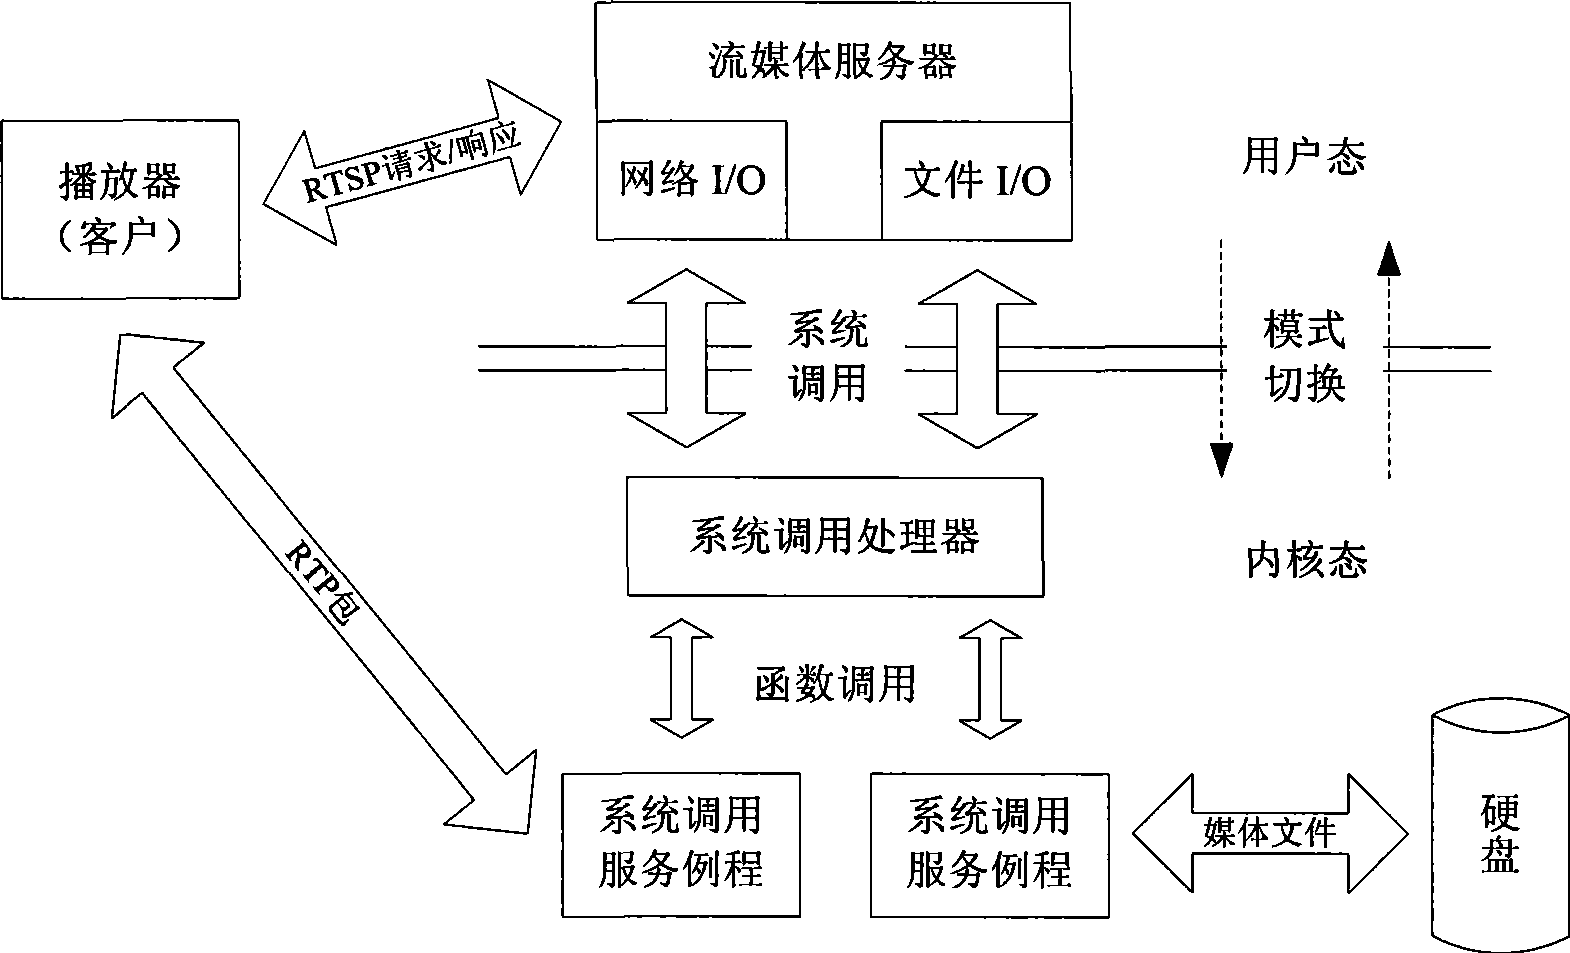 Operation method for memory sharing media server and functional module construction